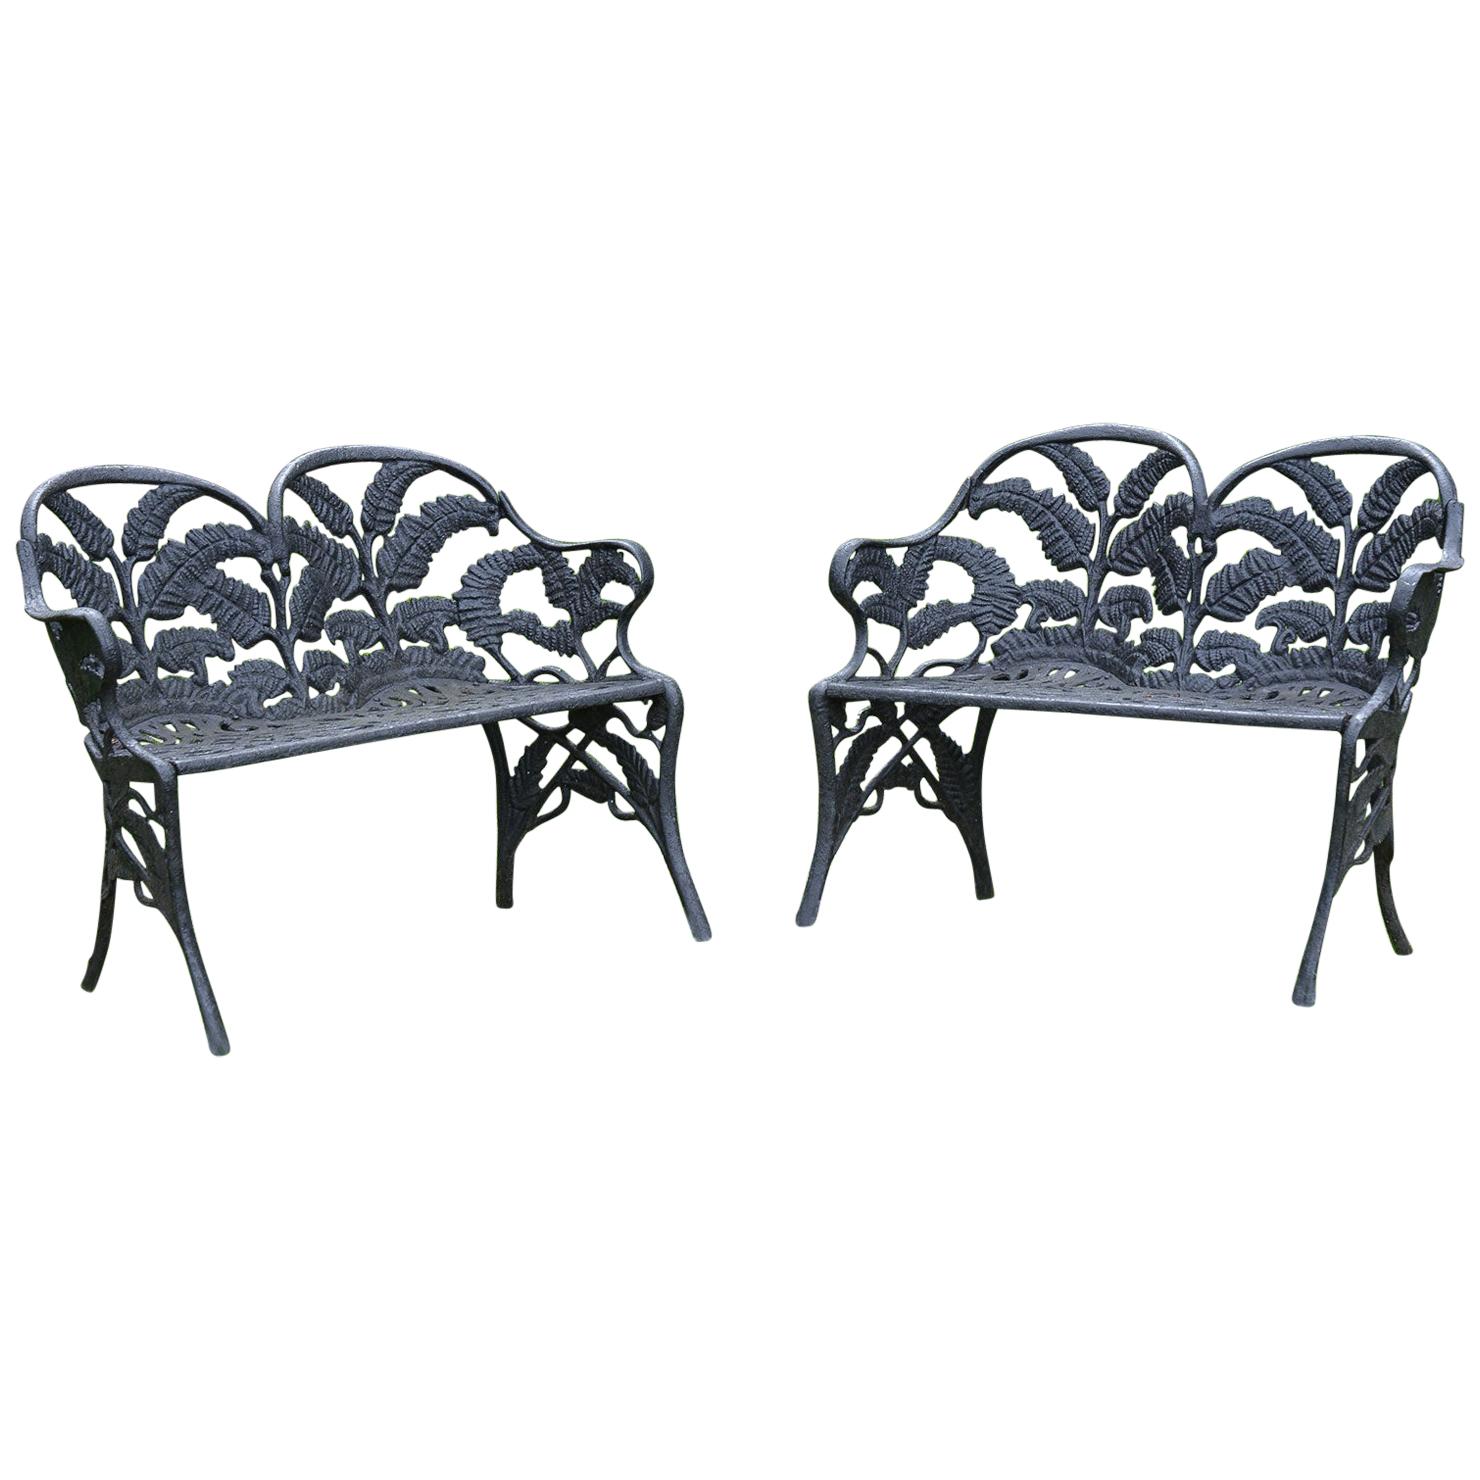 Pair of Black Fern Cast Iron Benches